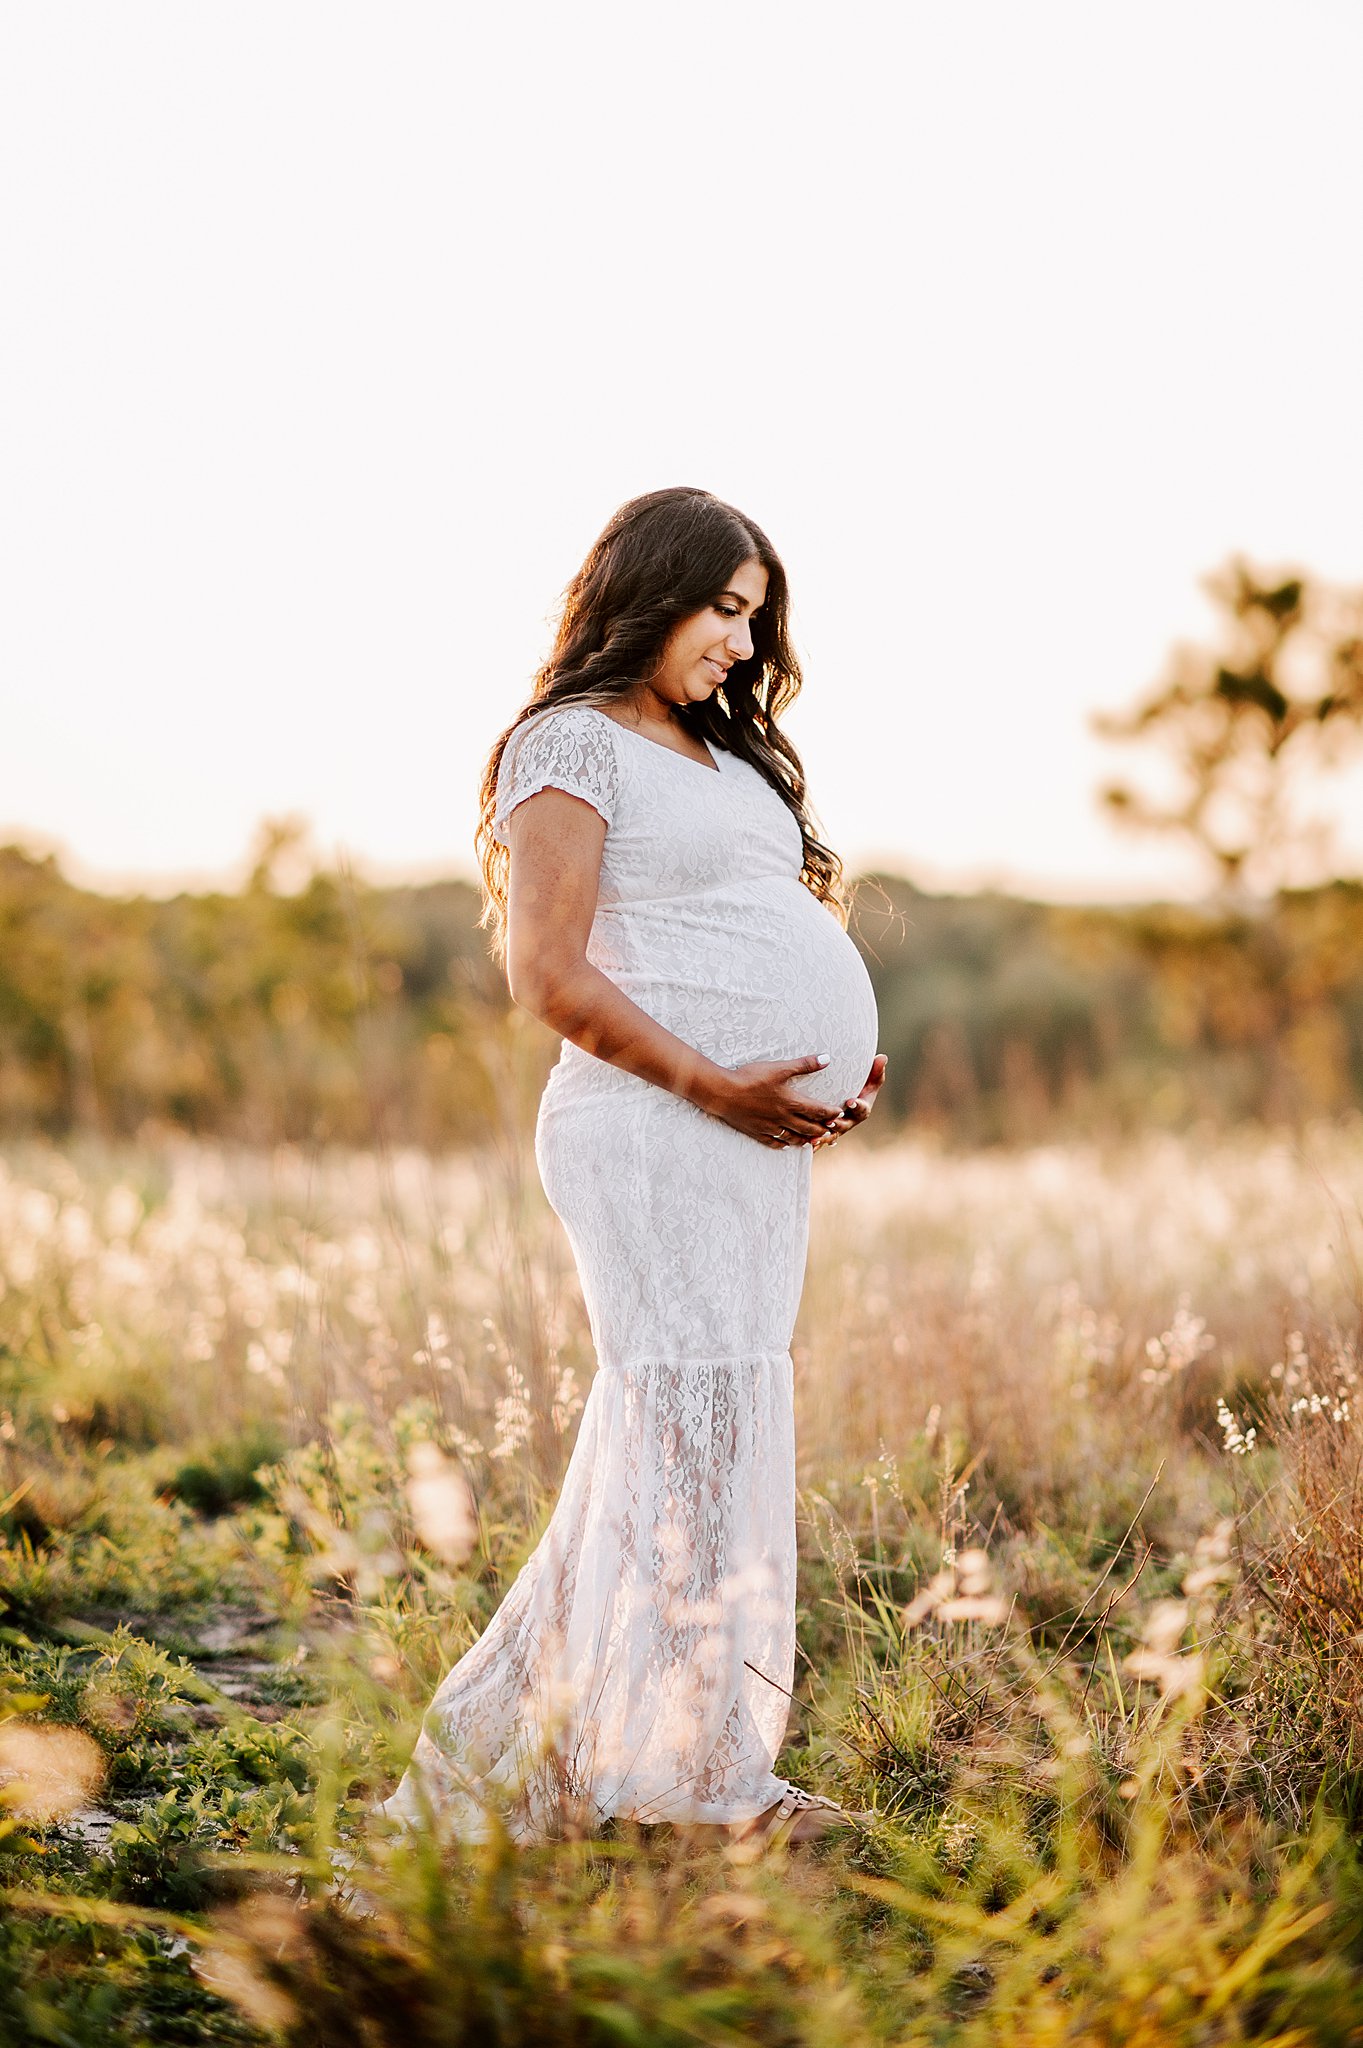 A mother to be in a white lace dress stands in a field of tall grass holding her bump